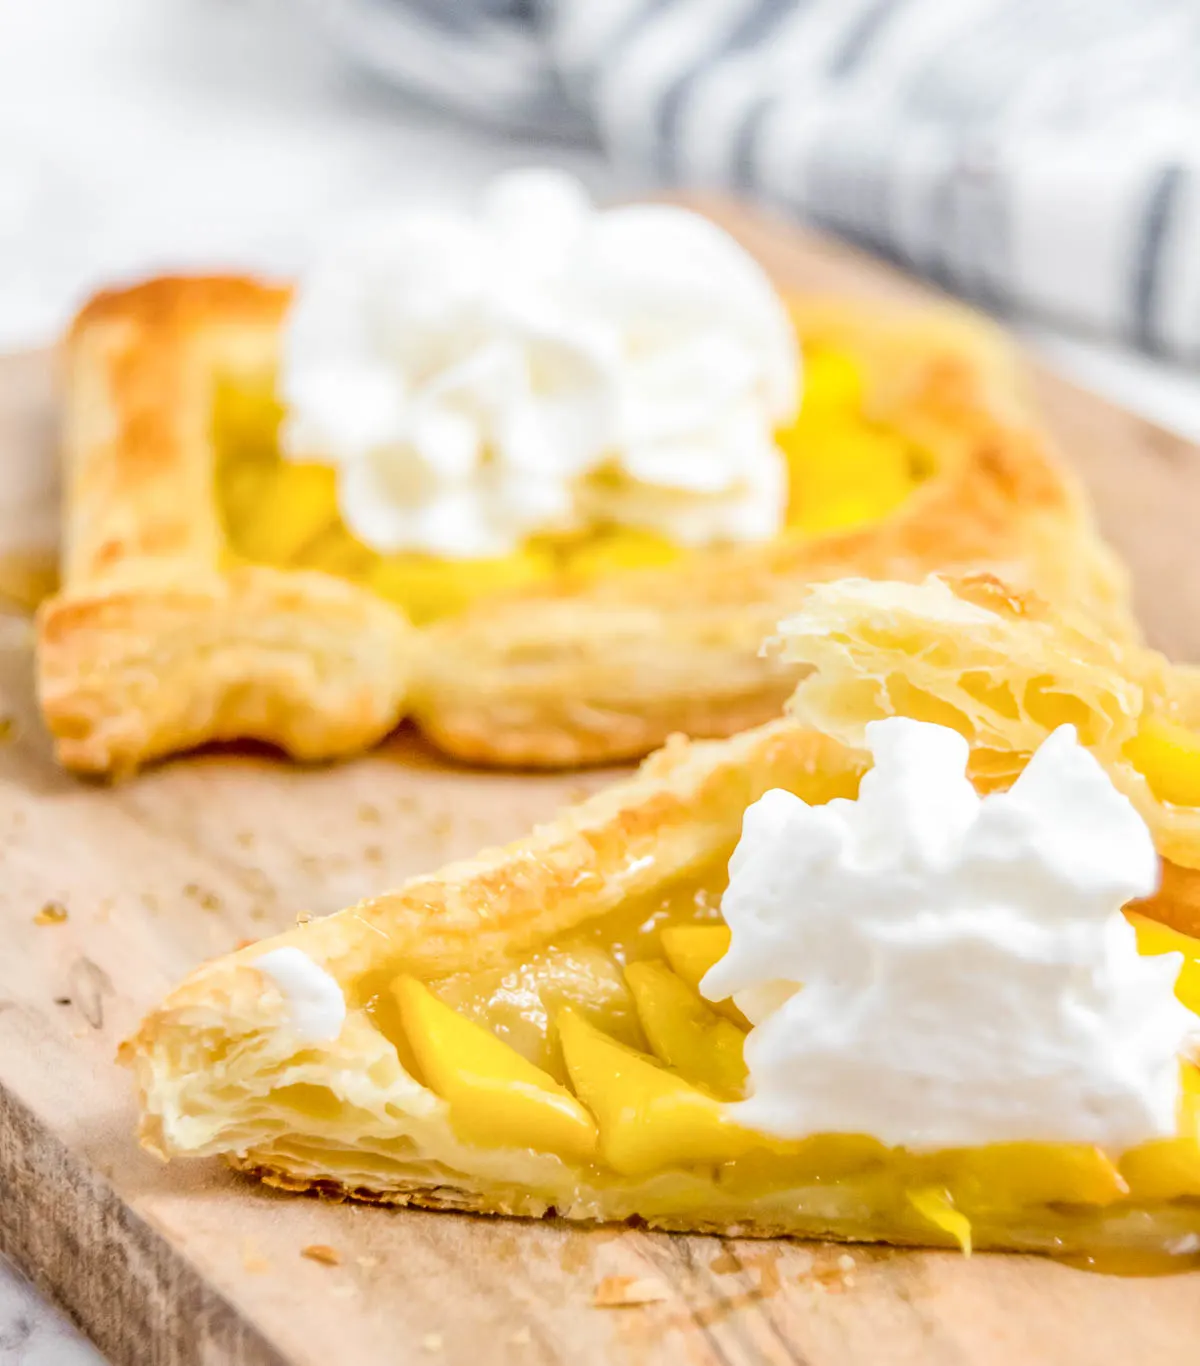 Mango puff topped with whipped cream cut in half to show flaky texture